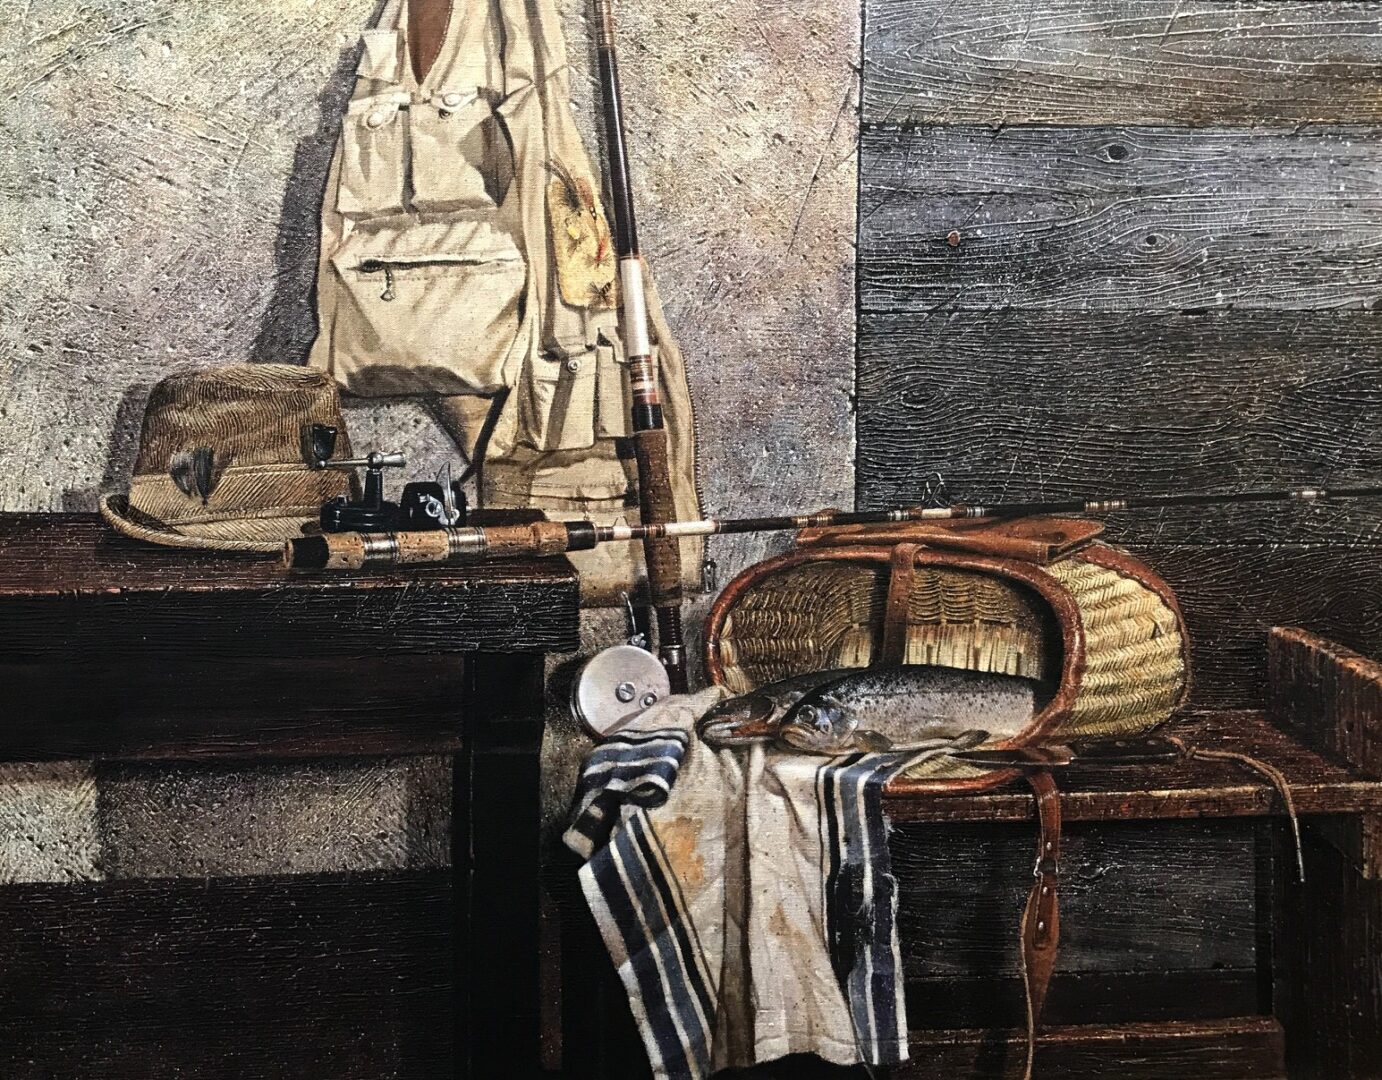 A painting of fishing equipment on a table.